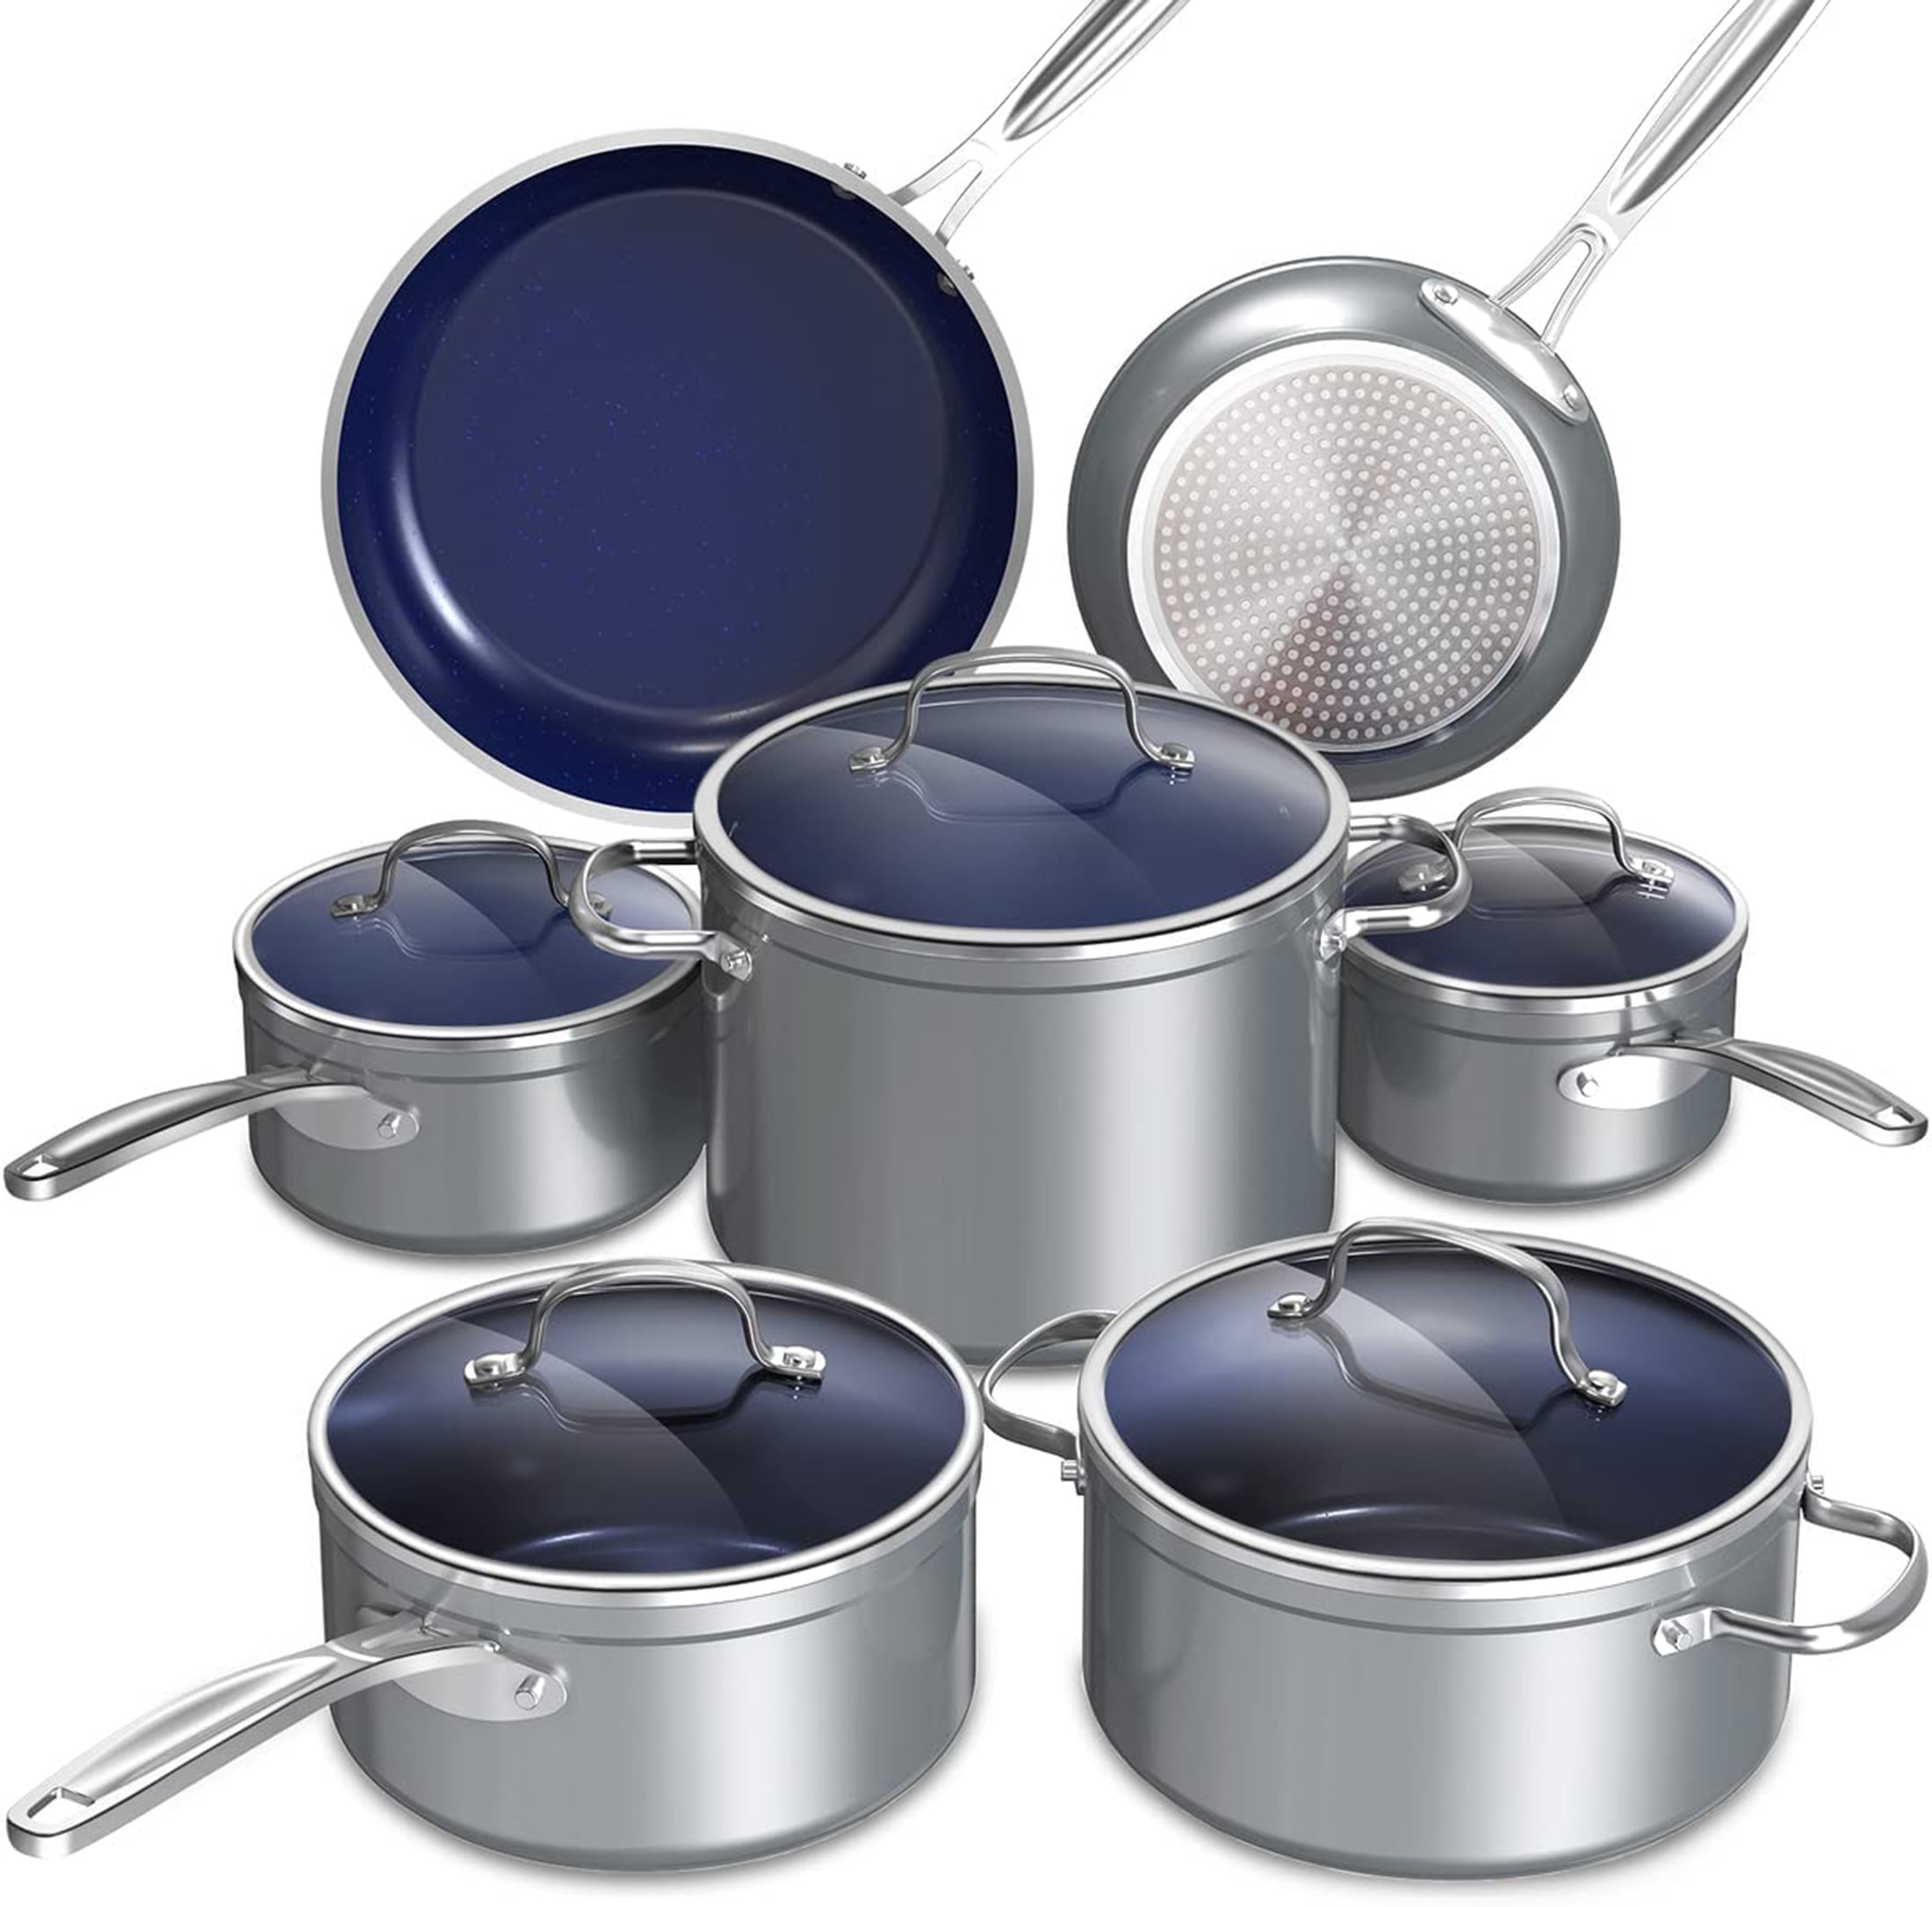 10-Piece Healthy Ceramic Titanium-Infused Induction Cookware Set with Pots,  Pans, Steamer, Spoon, and Turner, Nonstick Pots and Pans Set for Kitchen,  Light Blue